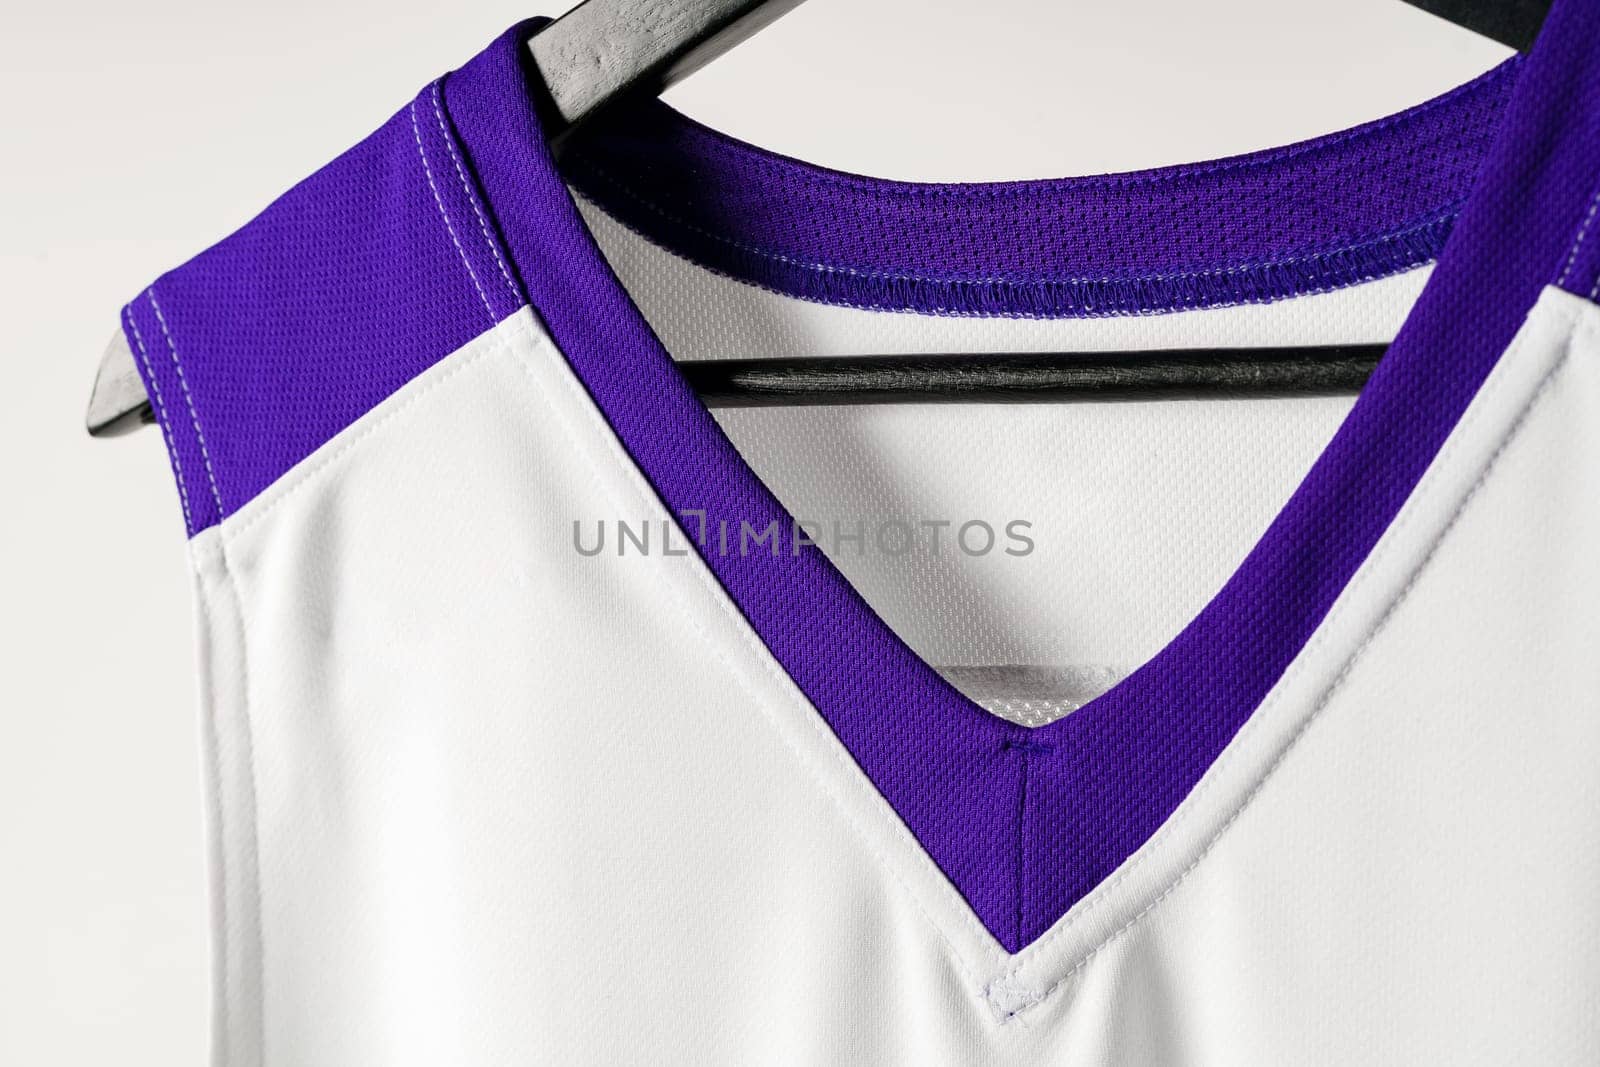 White basketball jersey hanging against white background close up